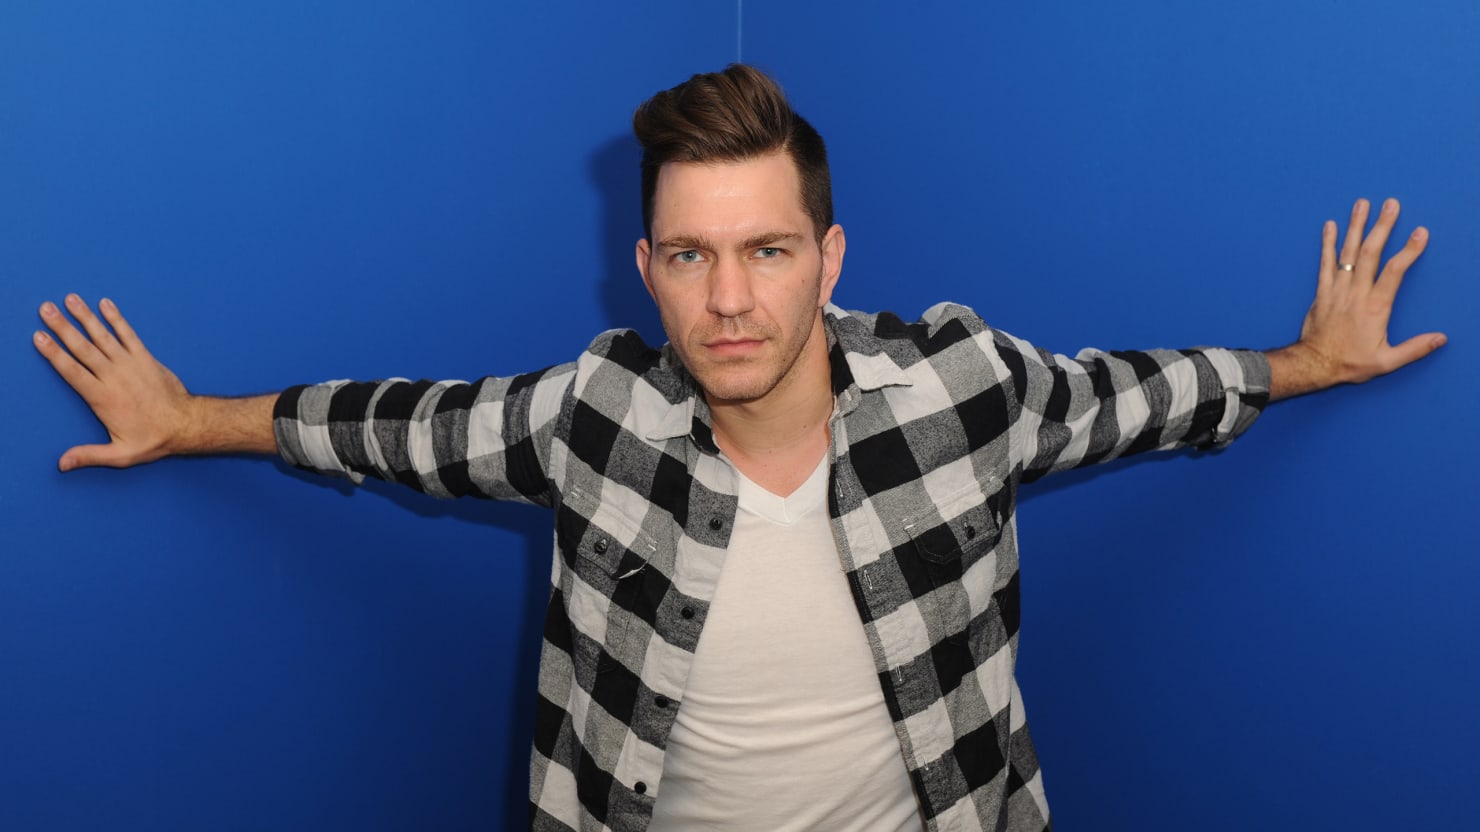 Is andy grammer gay